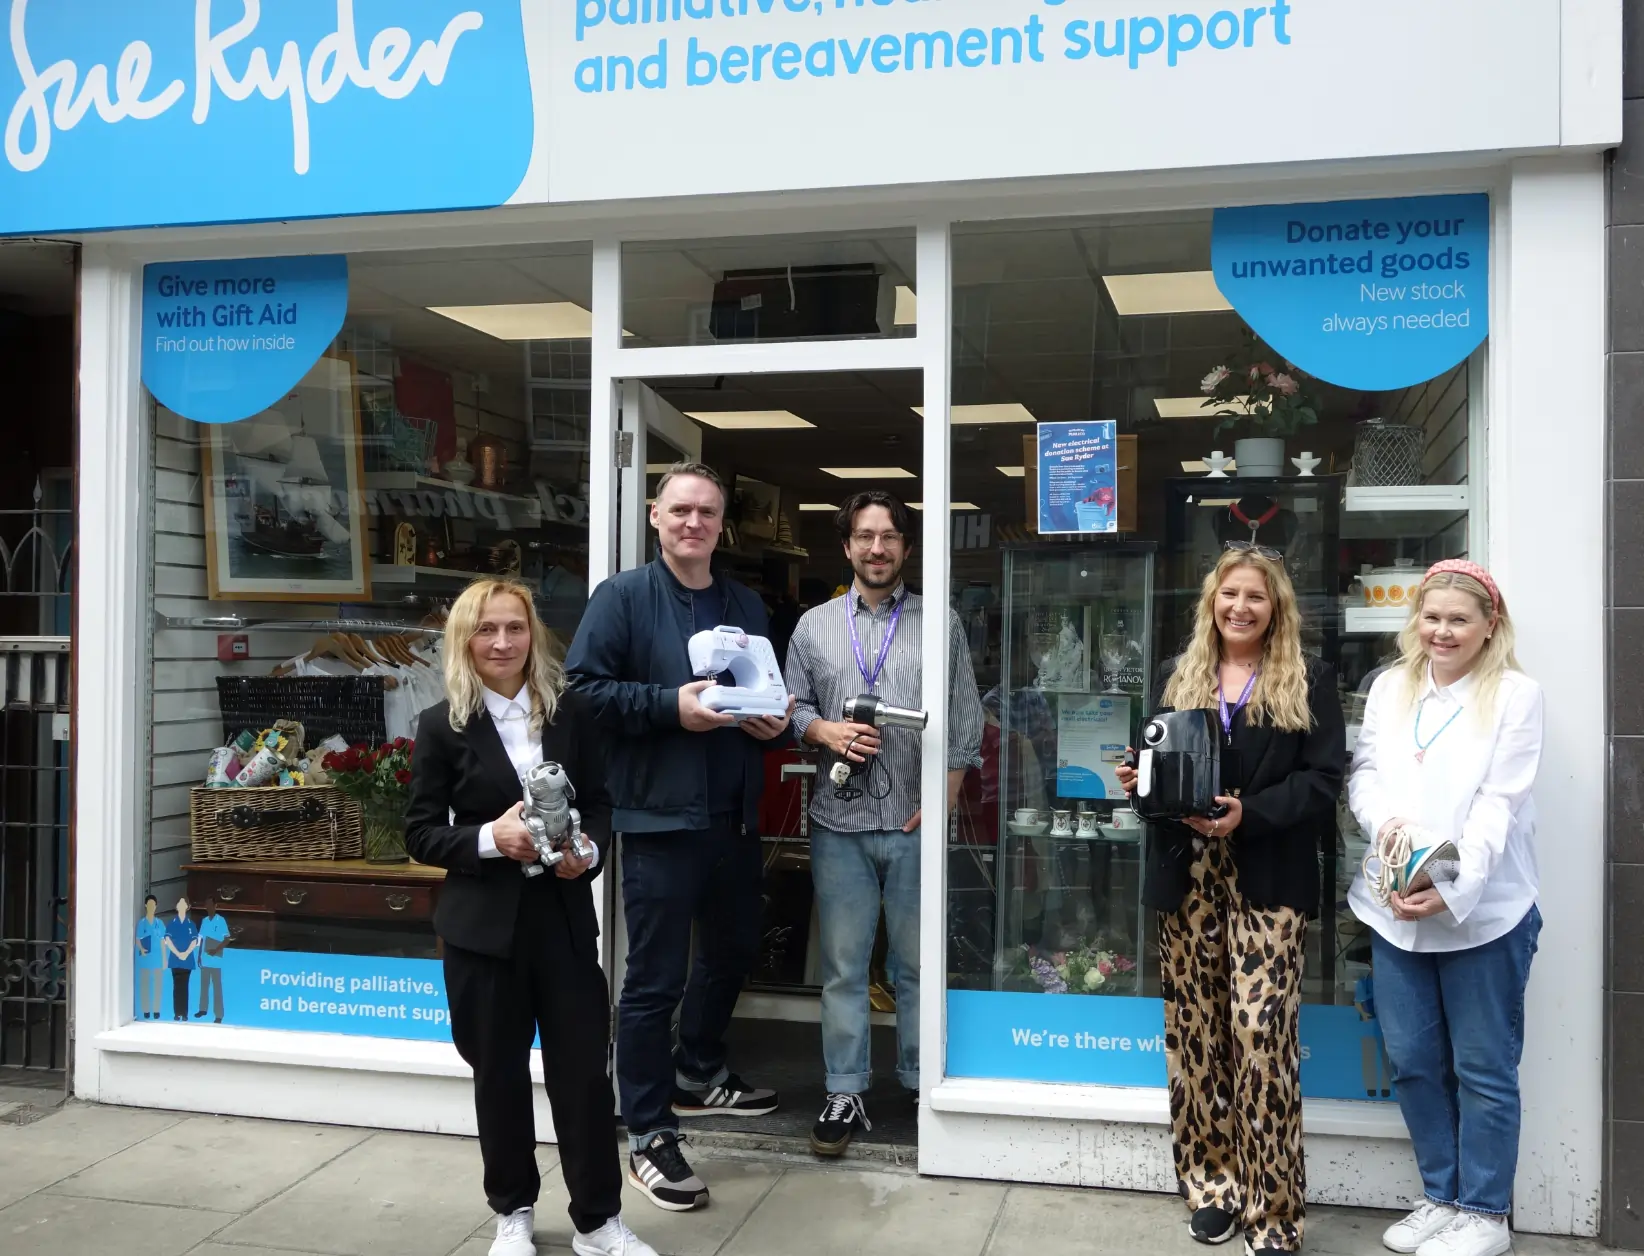 three pale skinned women and two pale skinned men standing in the doorway of a Sue Ryder charity shop